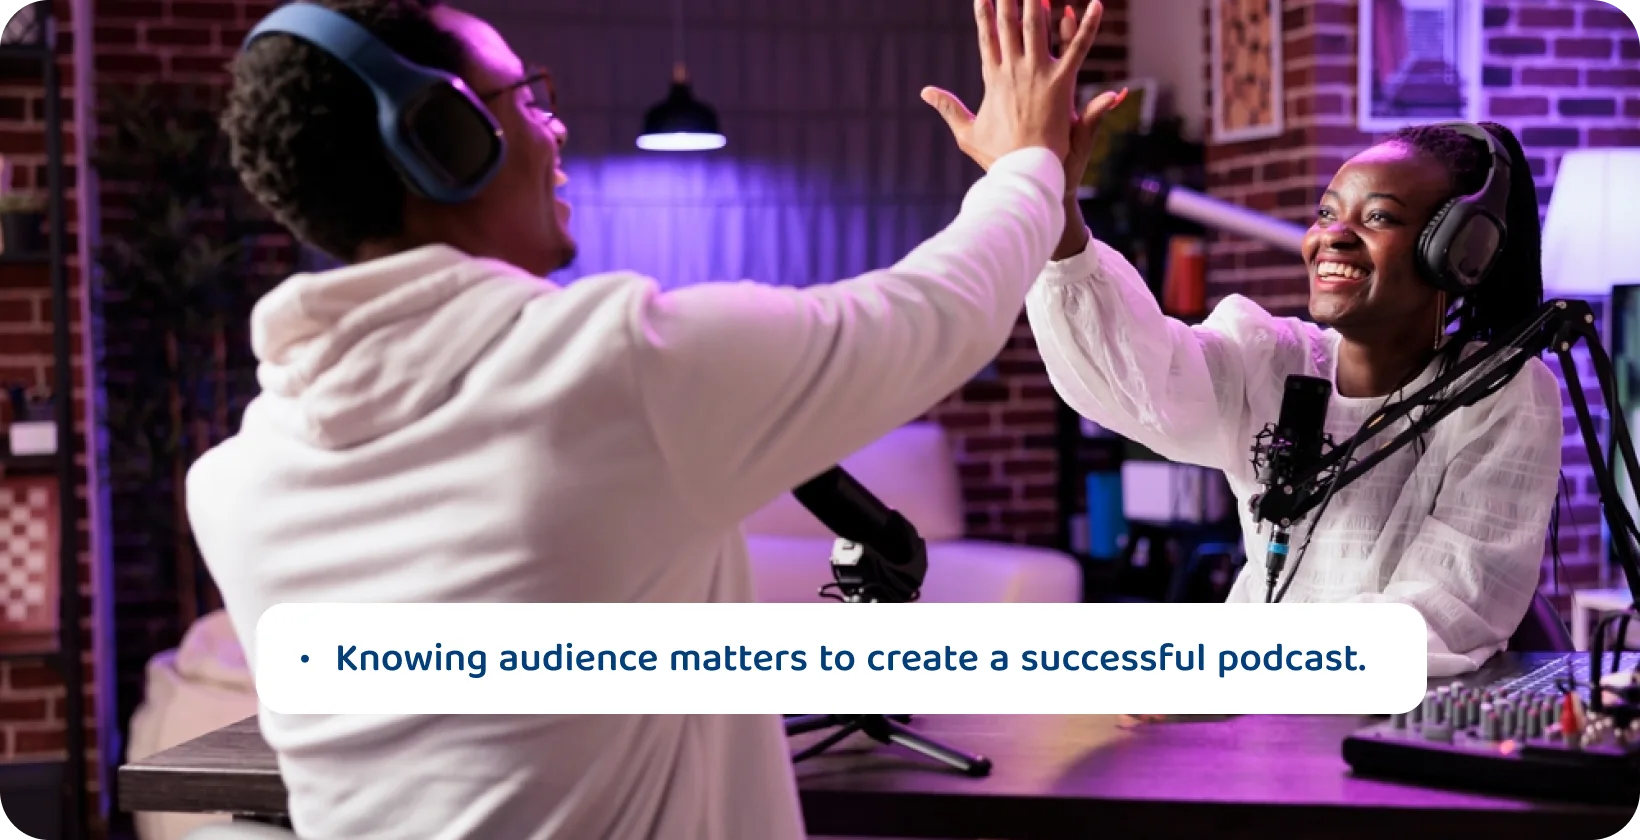 Podcast hosts high-fiving in a studio setup, signifying the joy of knowing their audience for podcast success.